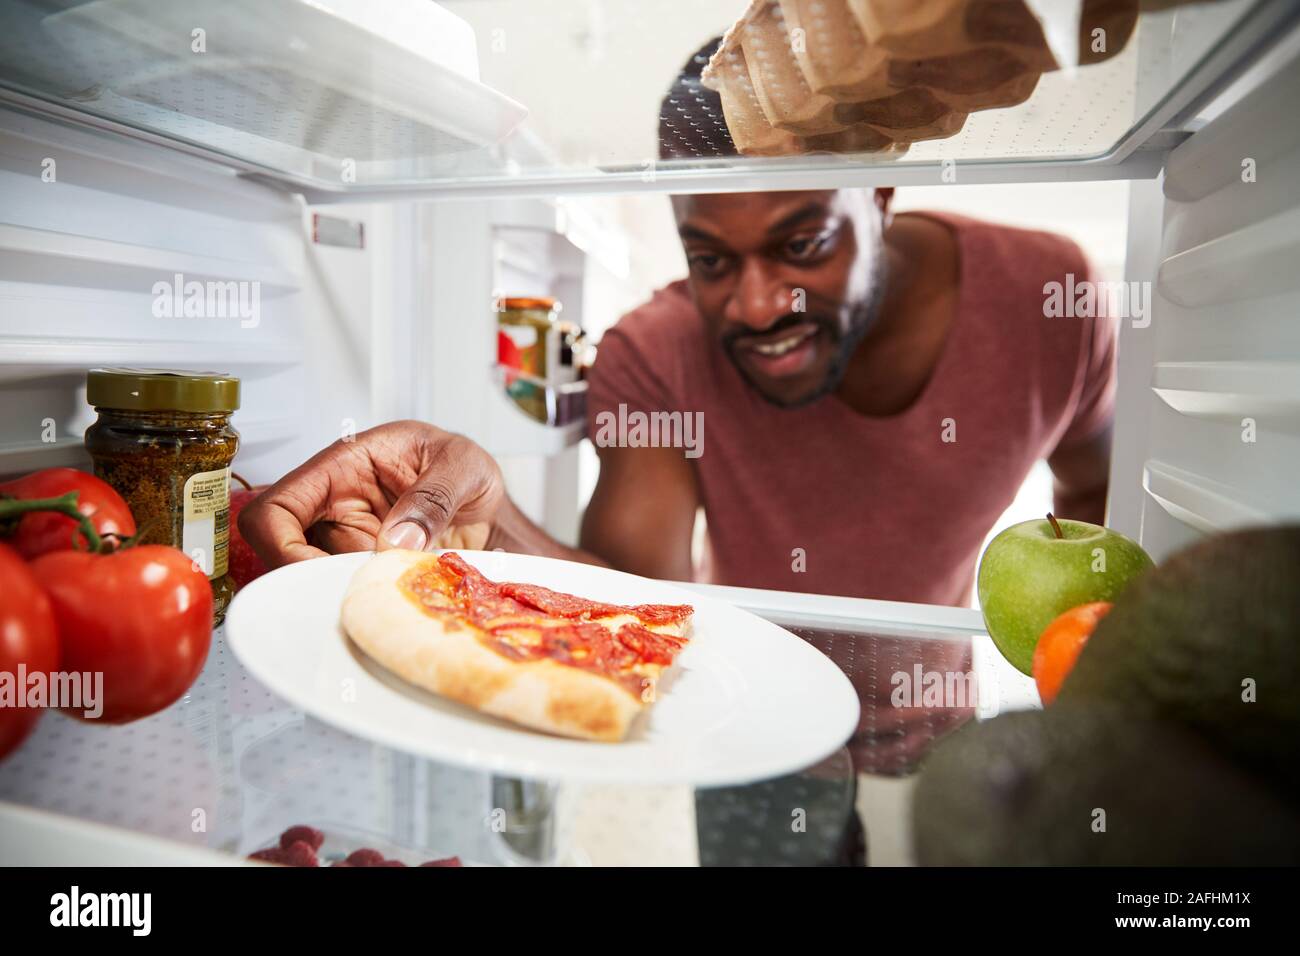 View Looking Out From Inside Of Refrigerator As Man Opens Door For Leftover Takeaway Pizza Slice Stock Photo